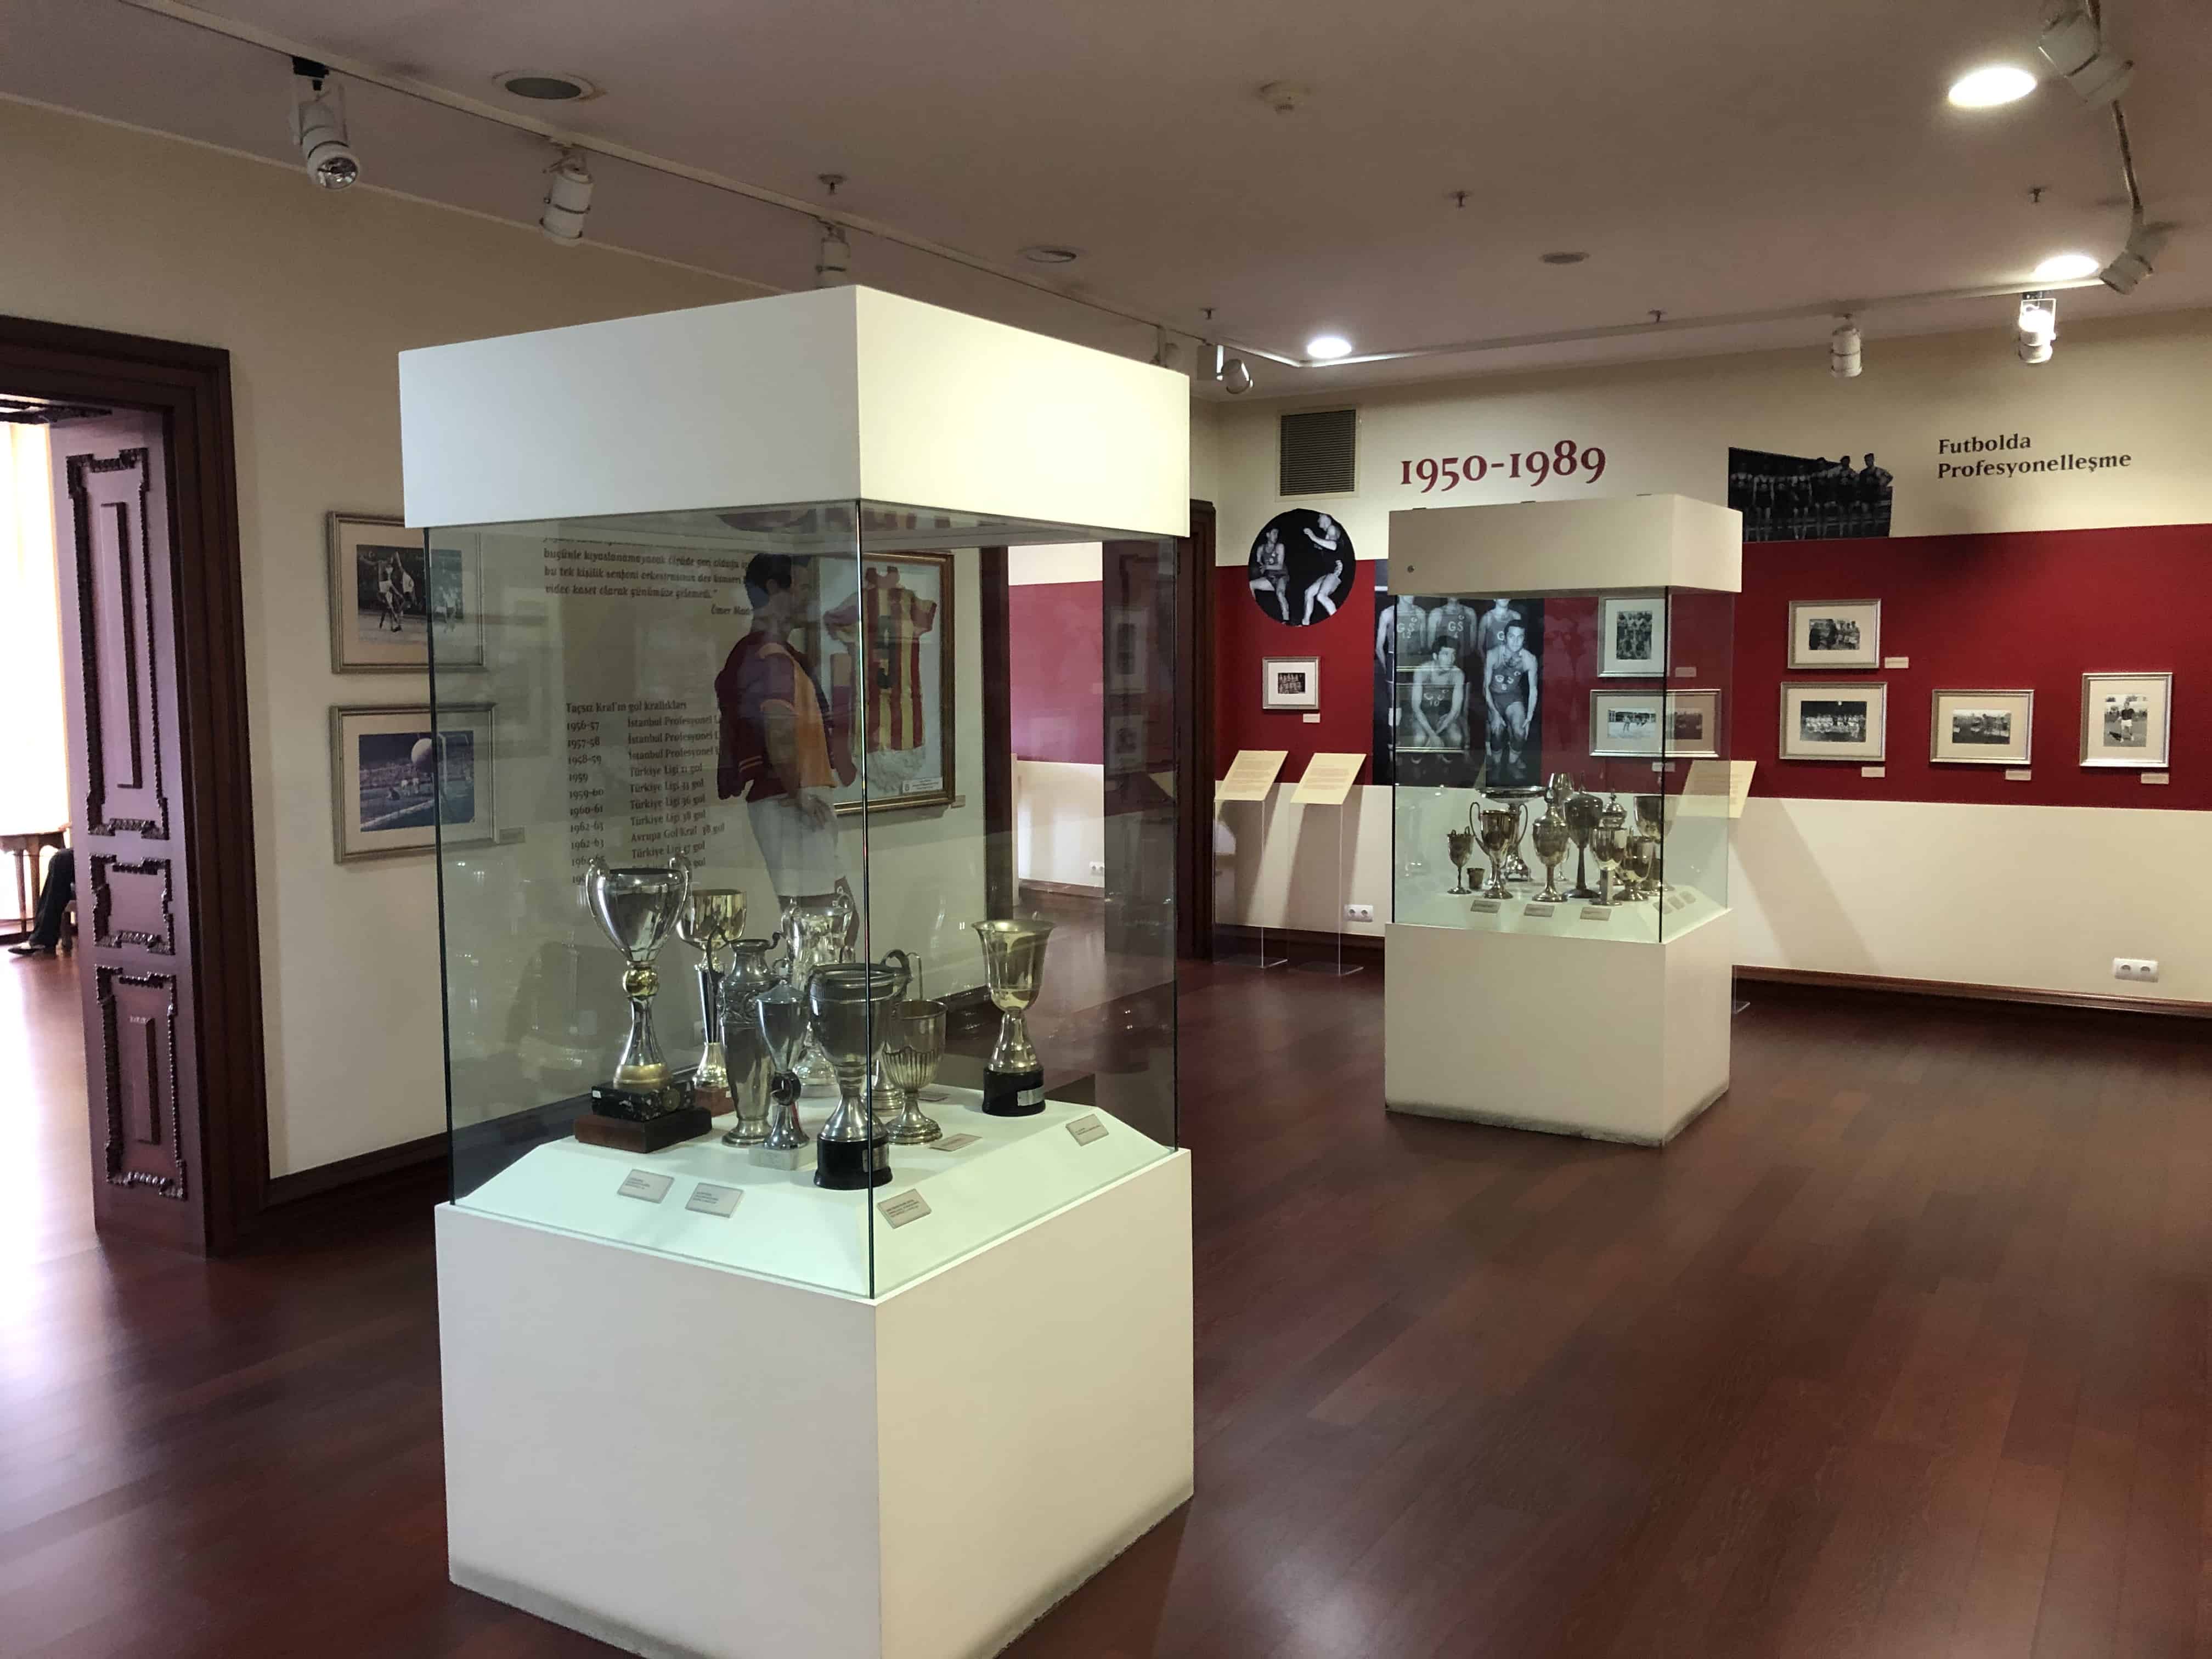 Galatasaray Sports Club section at the Galatasaray Museum in Istanbul, Turkey